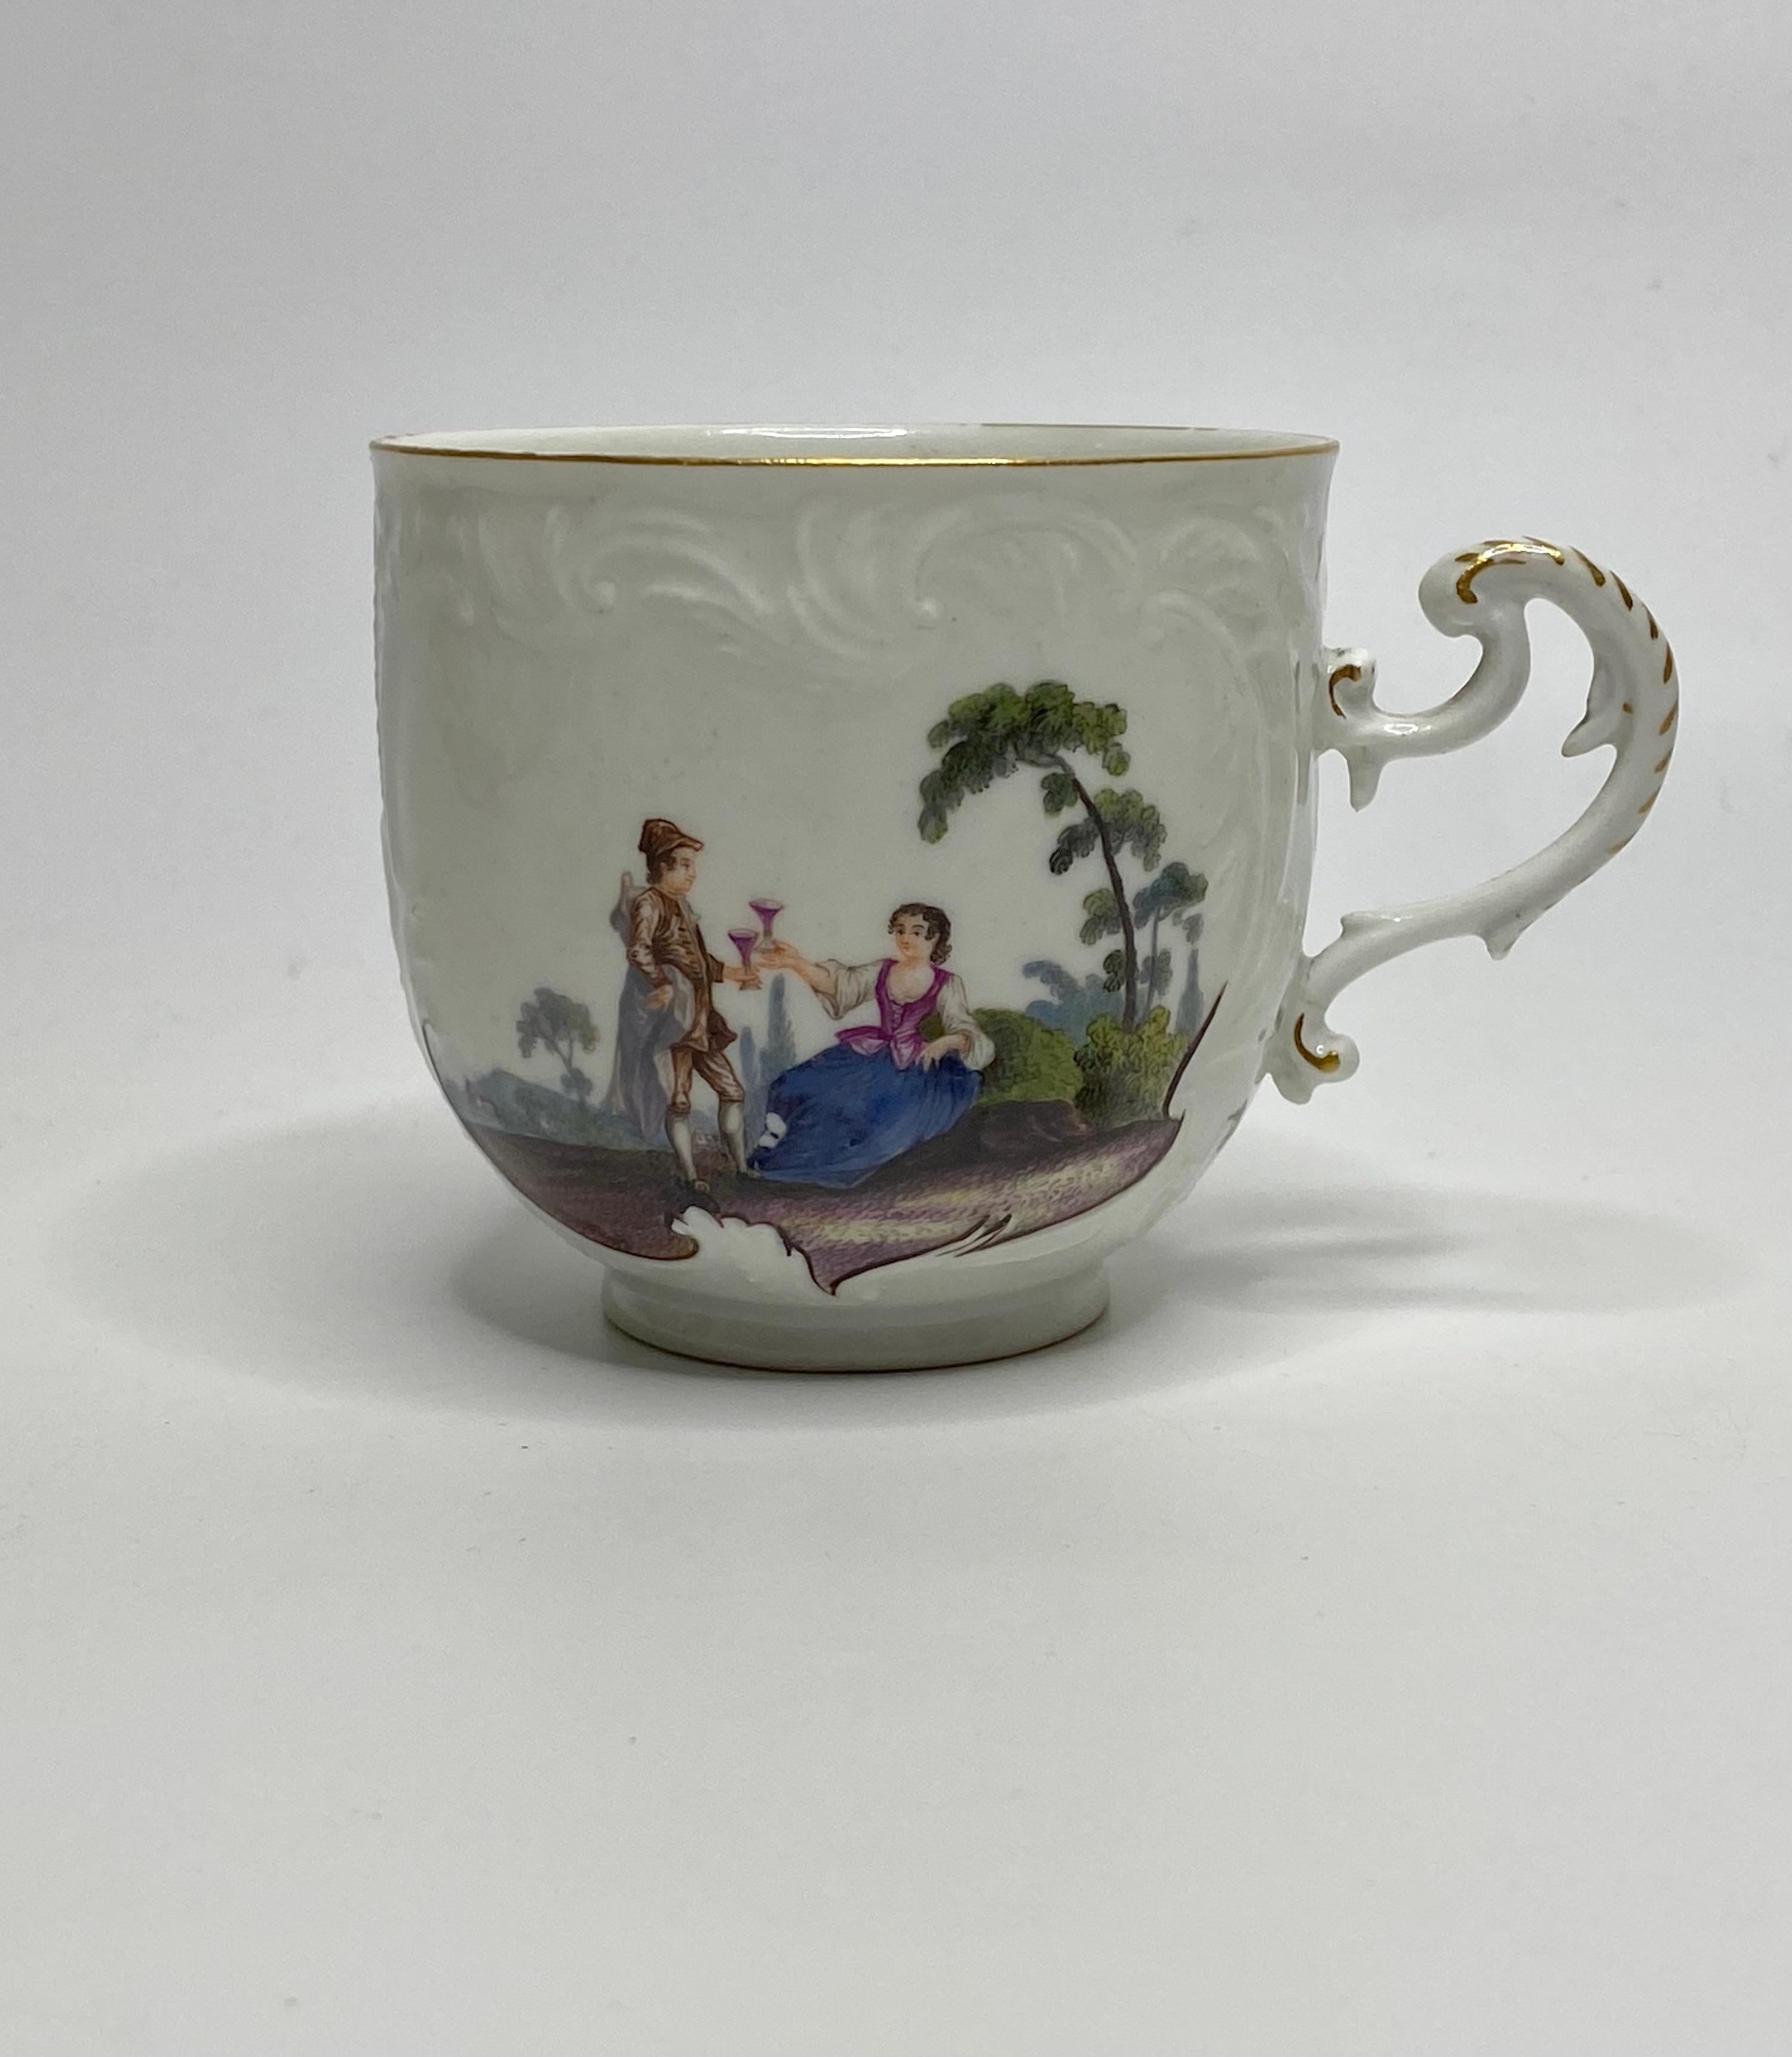 Meissen porcelain cup and saucer, c. 1740. 1